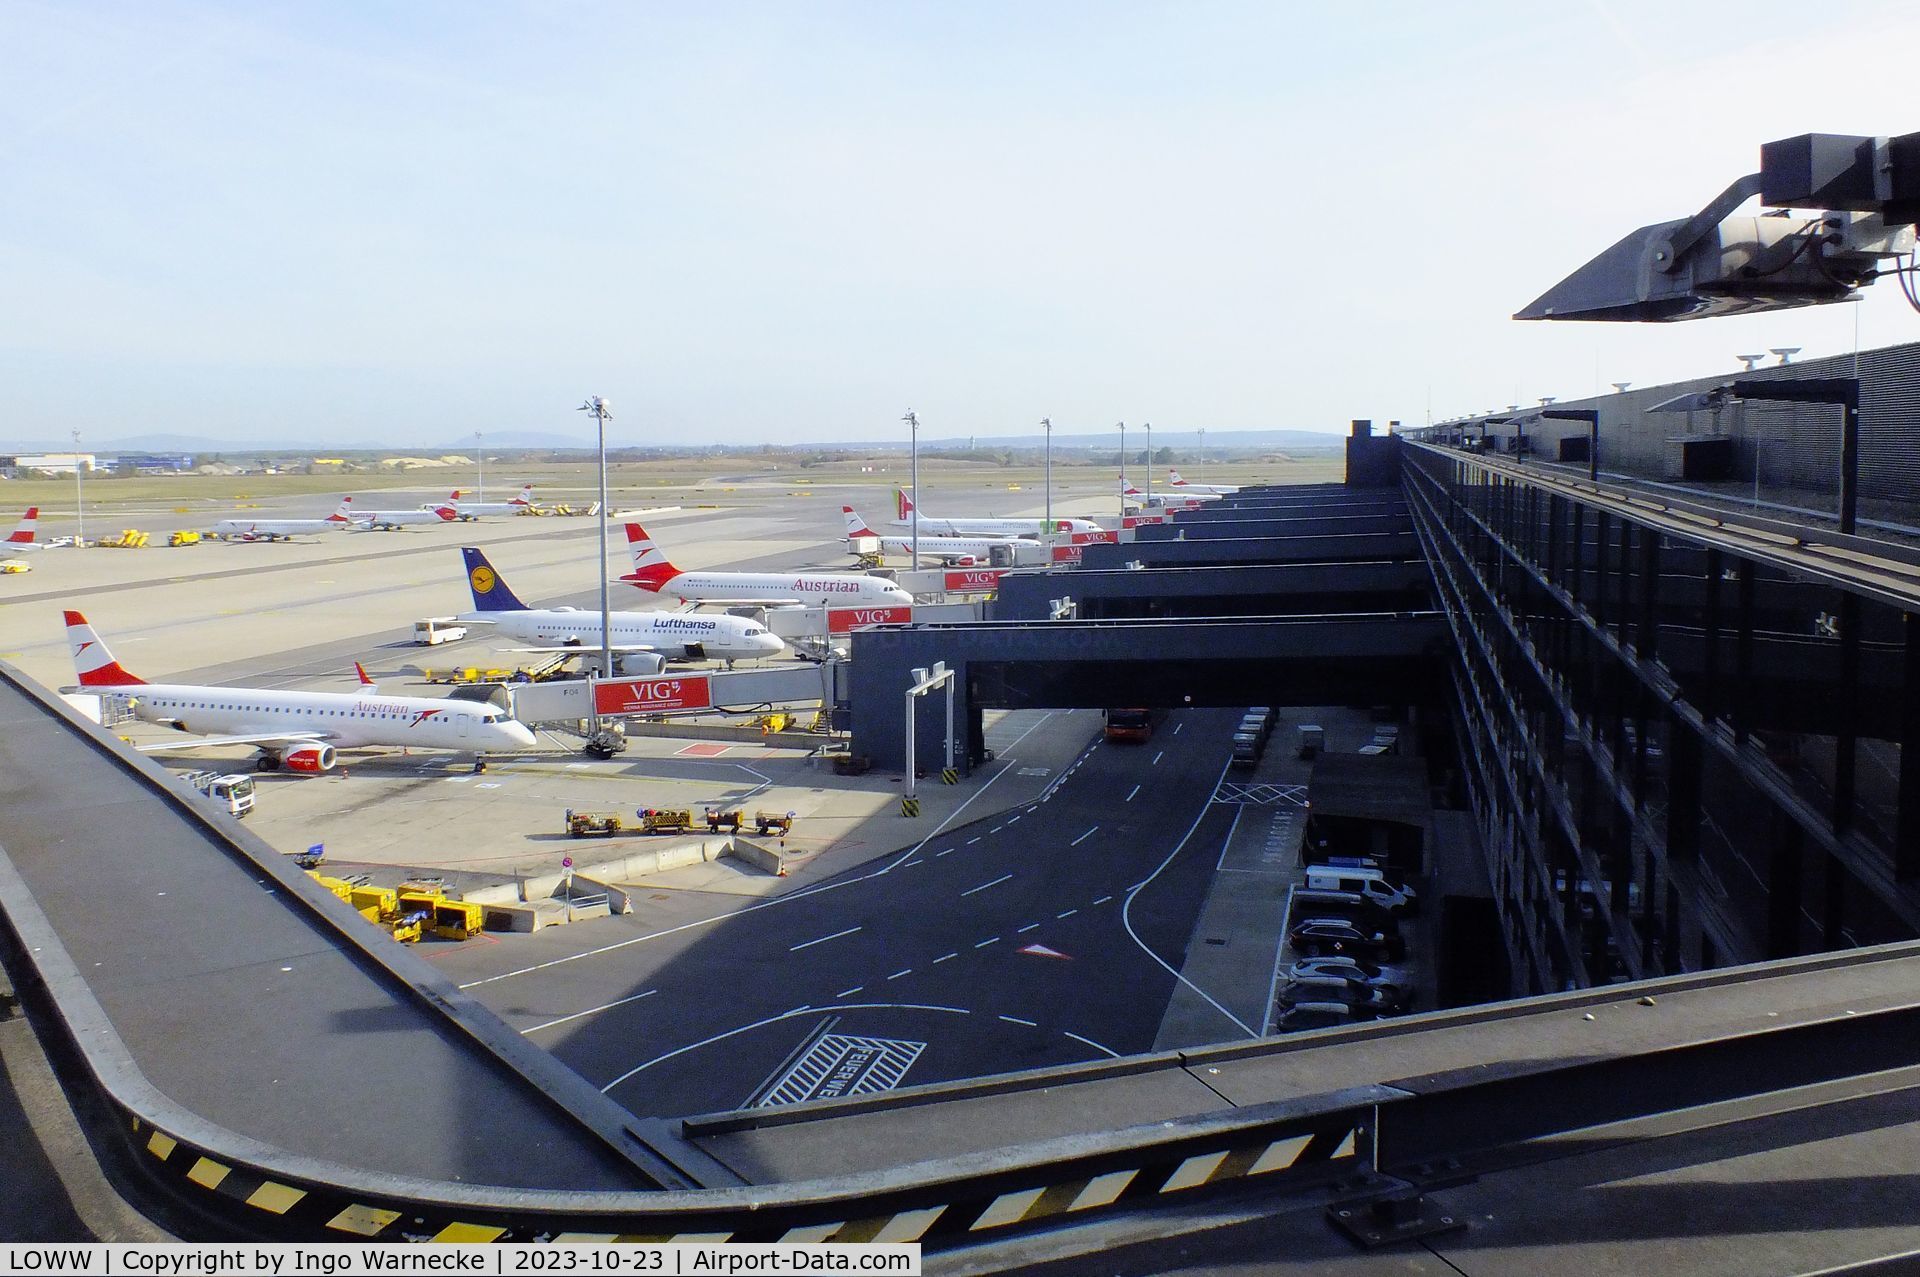 Vienna International Airport, Vienna Austria (LOWW) - northern side of gates building F/G with apron at the eastern end of terminal 3 at Wien airport